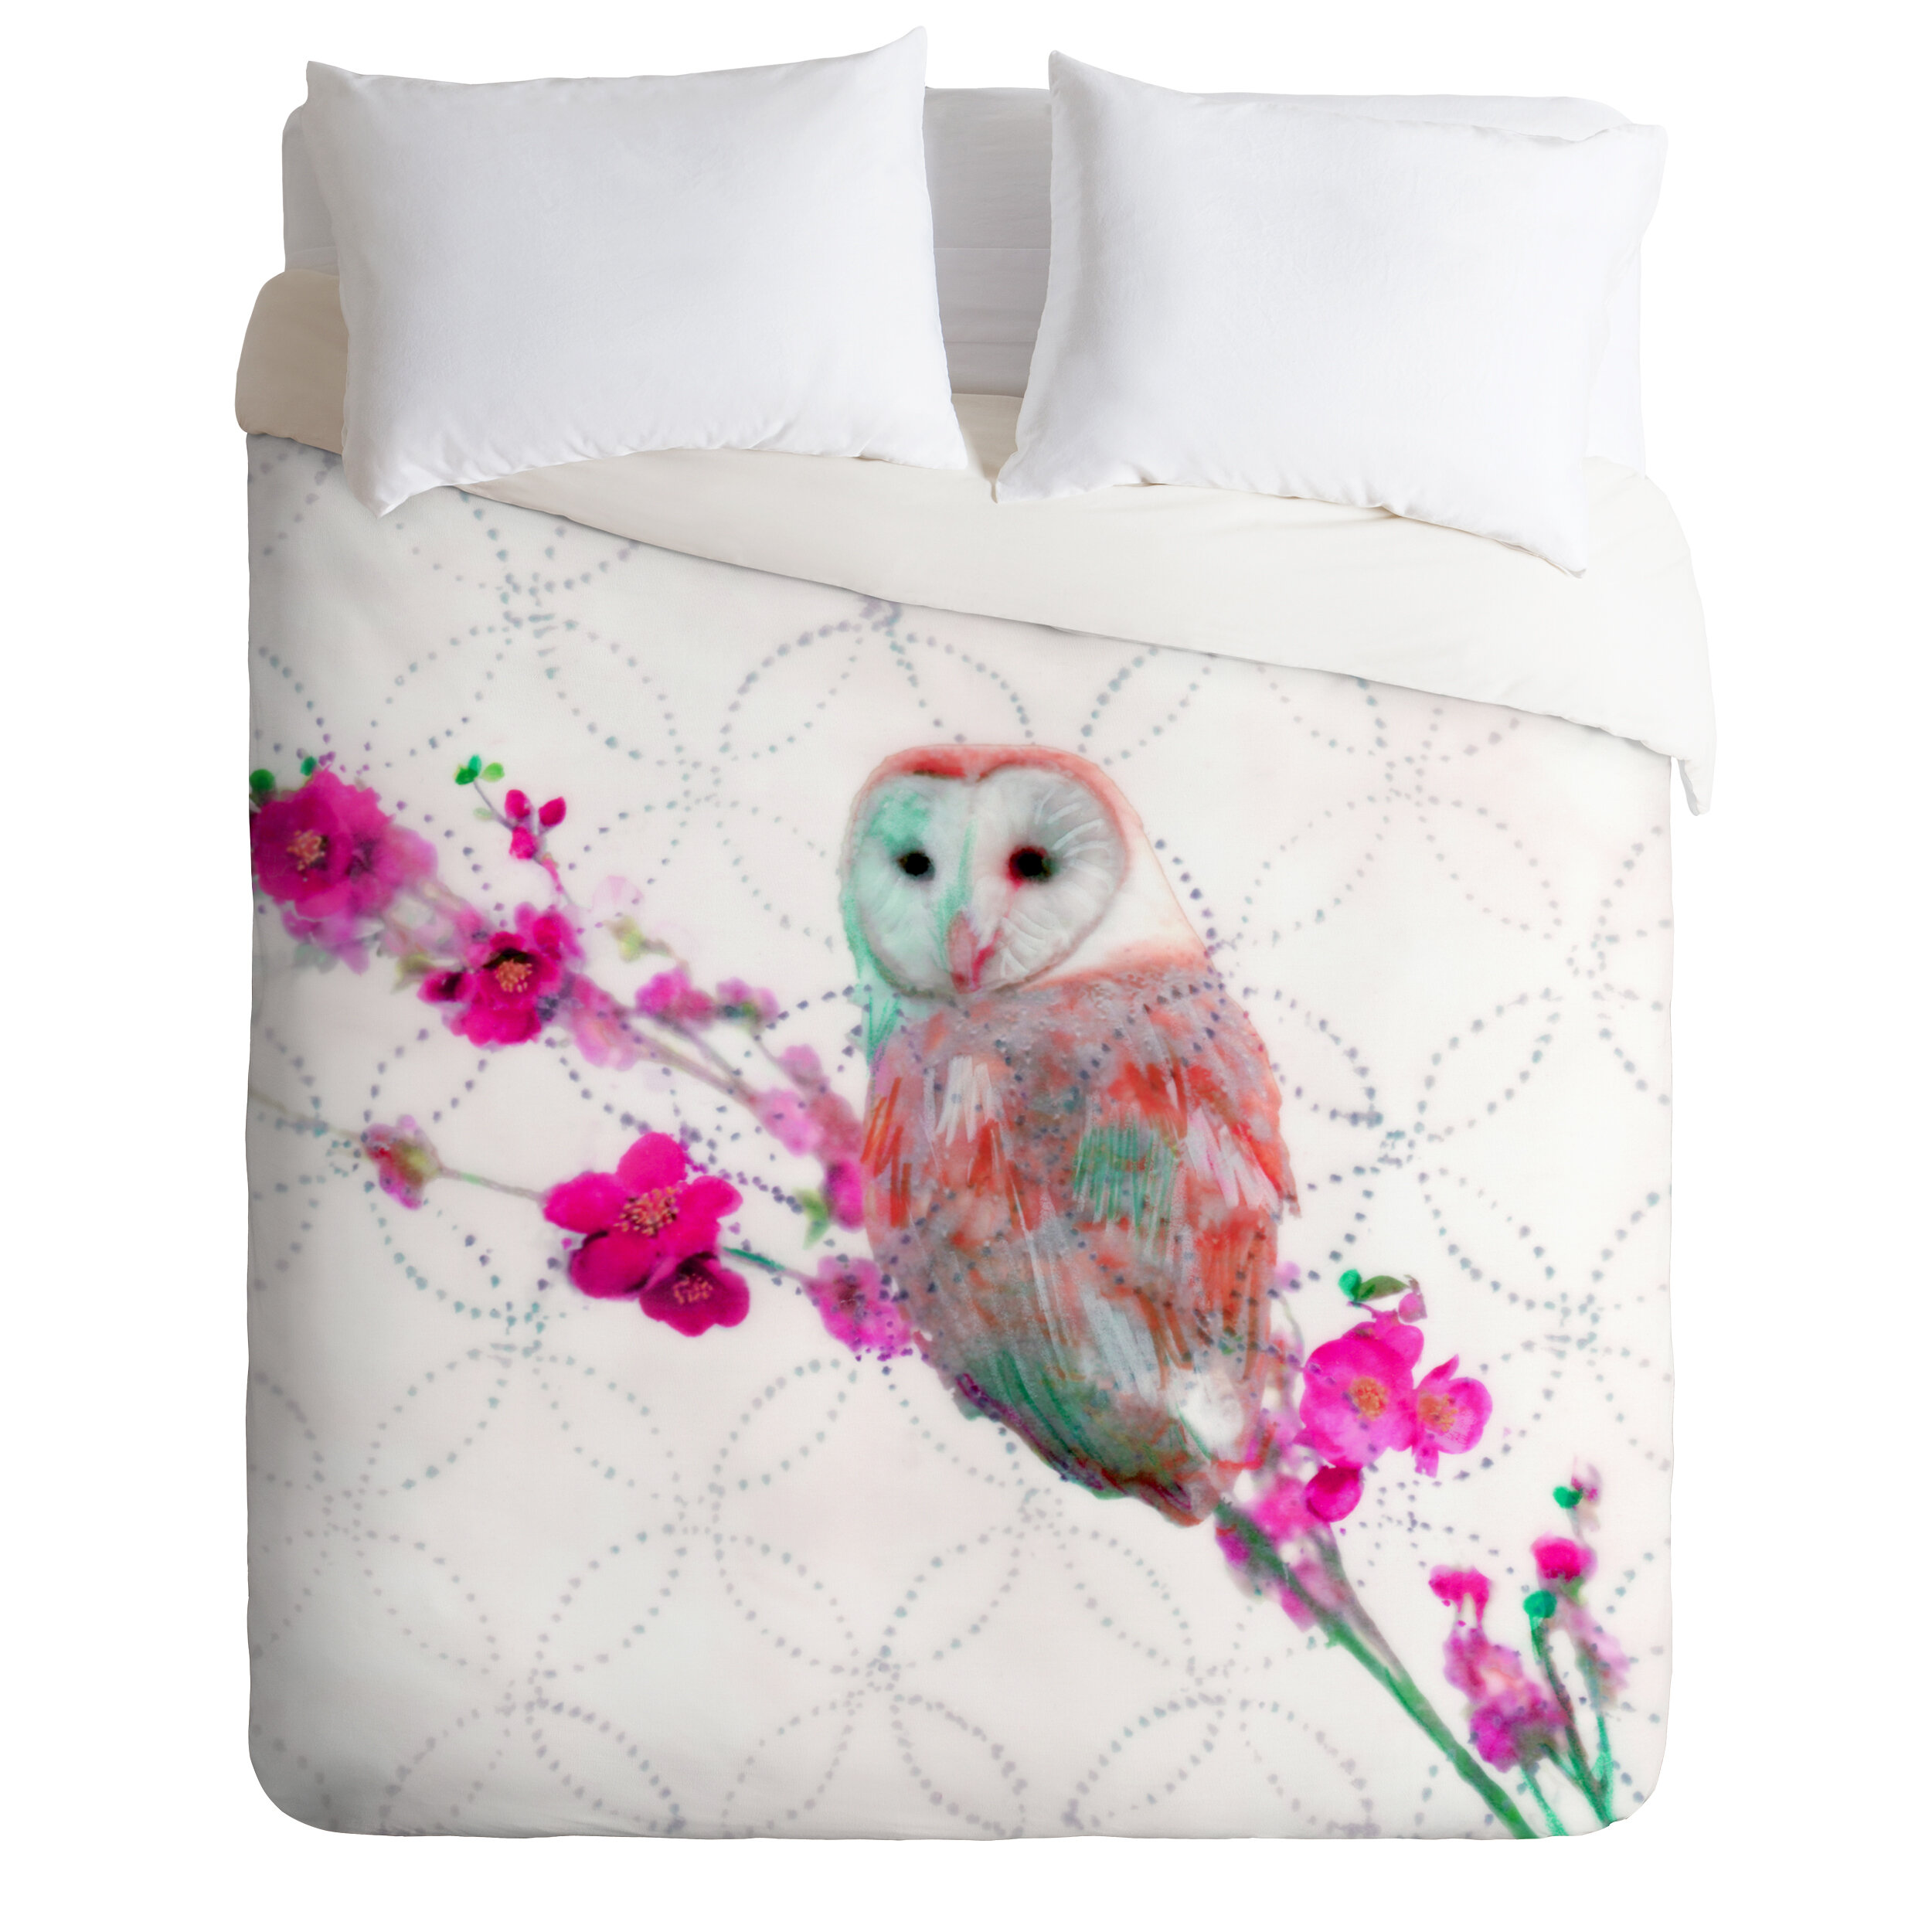 Deny Designs Hadley Hutton Quinceowl Duvet Cover Collection